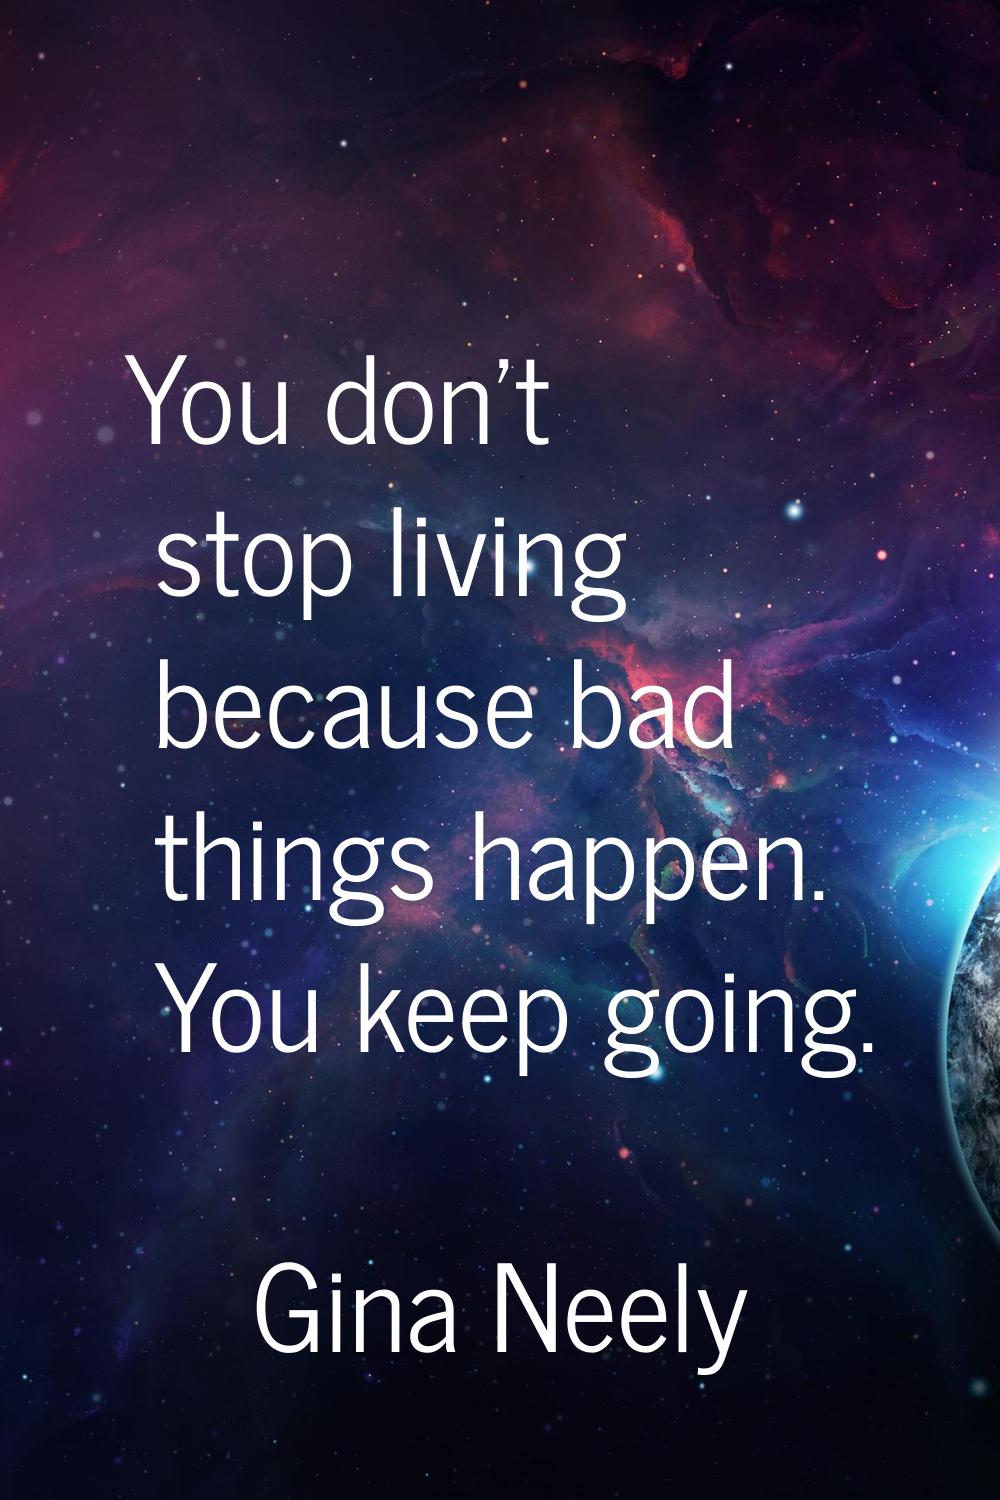 You don't stop living because bad things happen. You keep going.